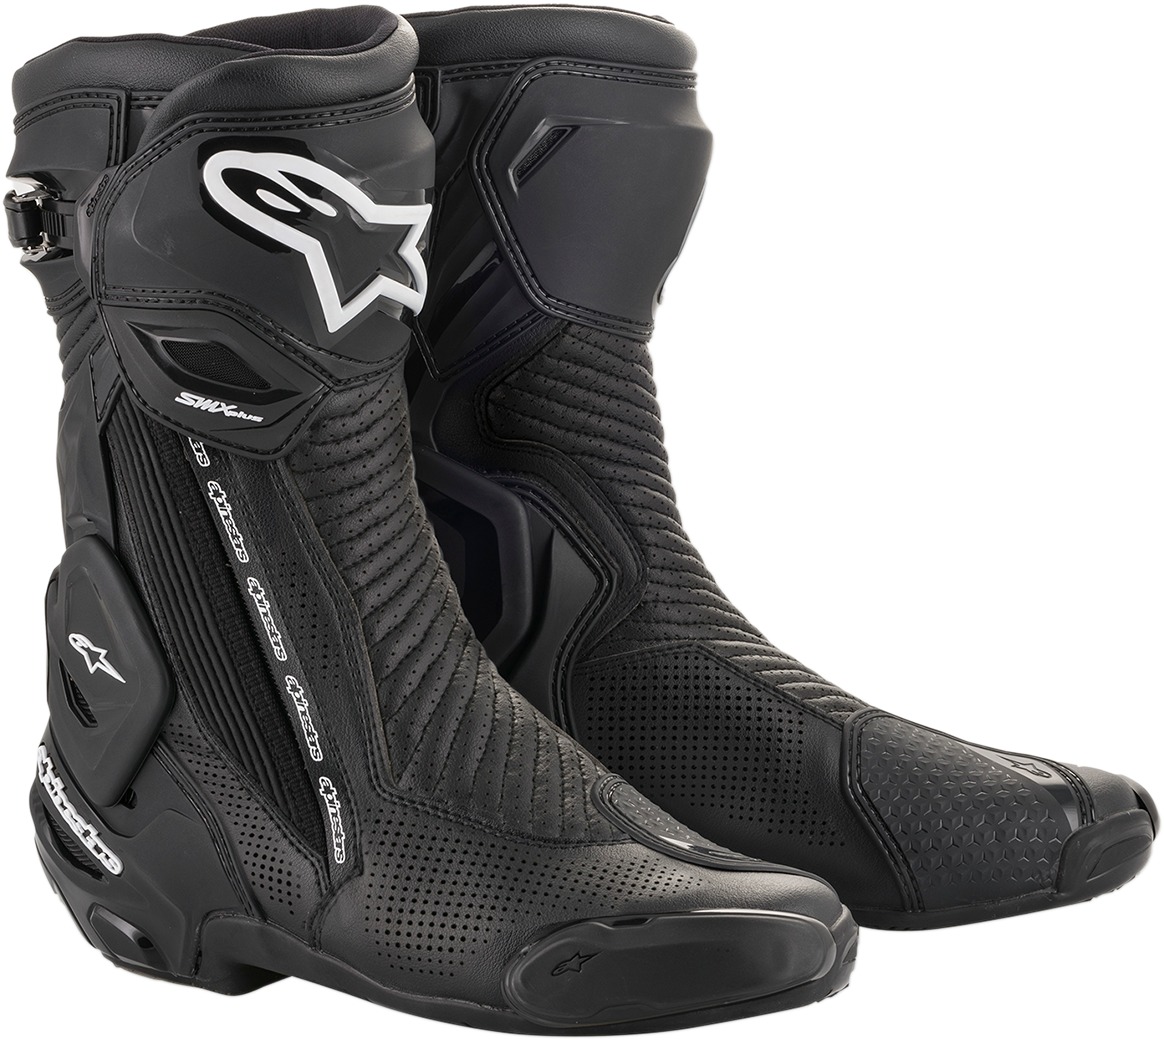 SMX Plus Street Riding Boots Black US 10.5 - Click Image to Close